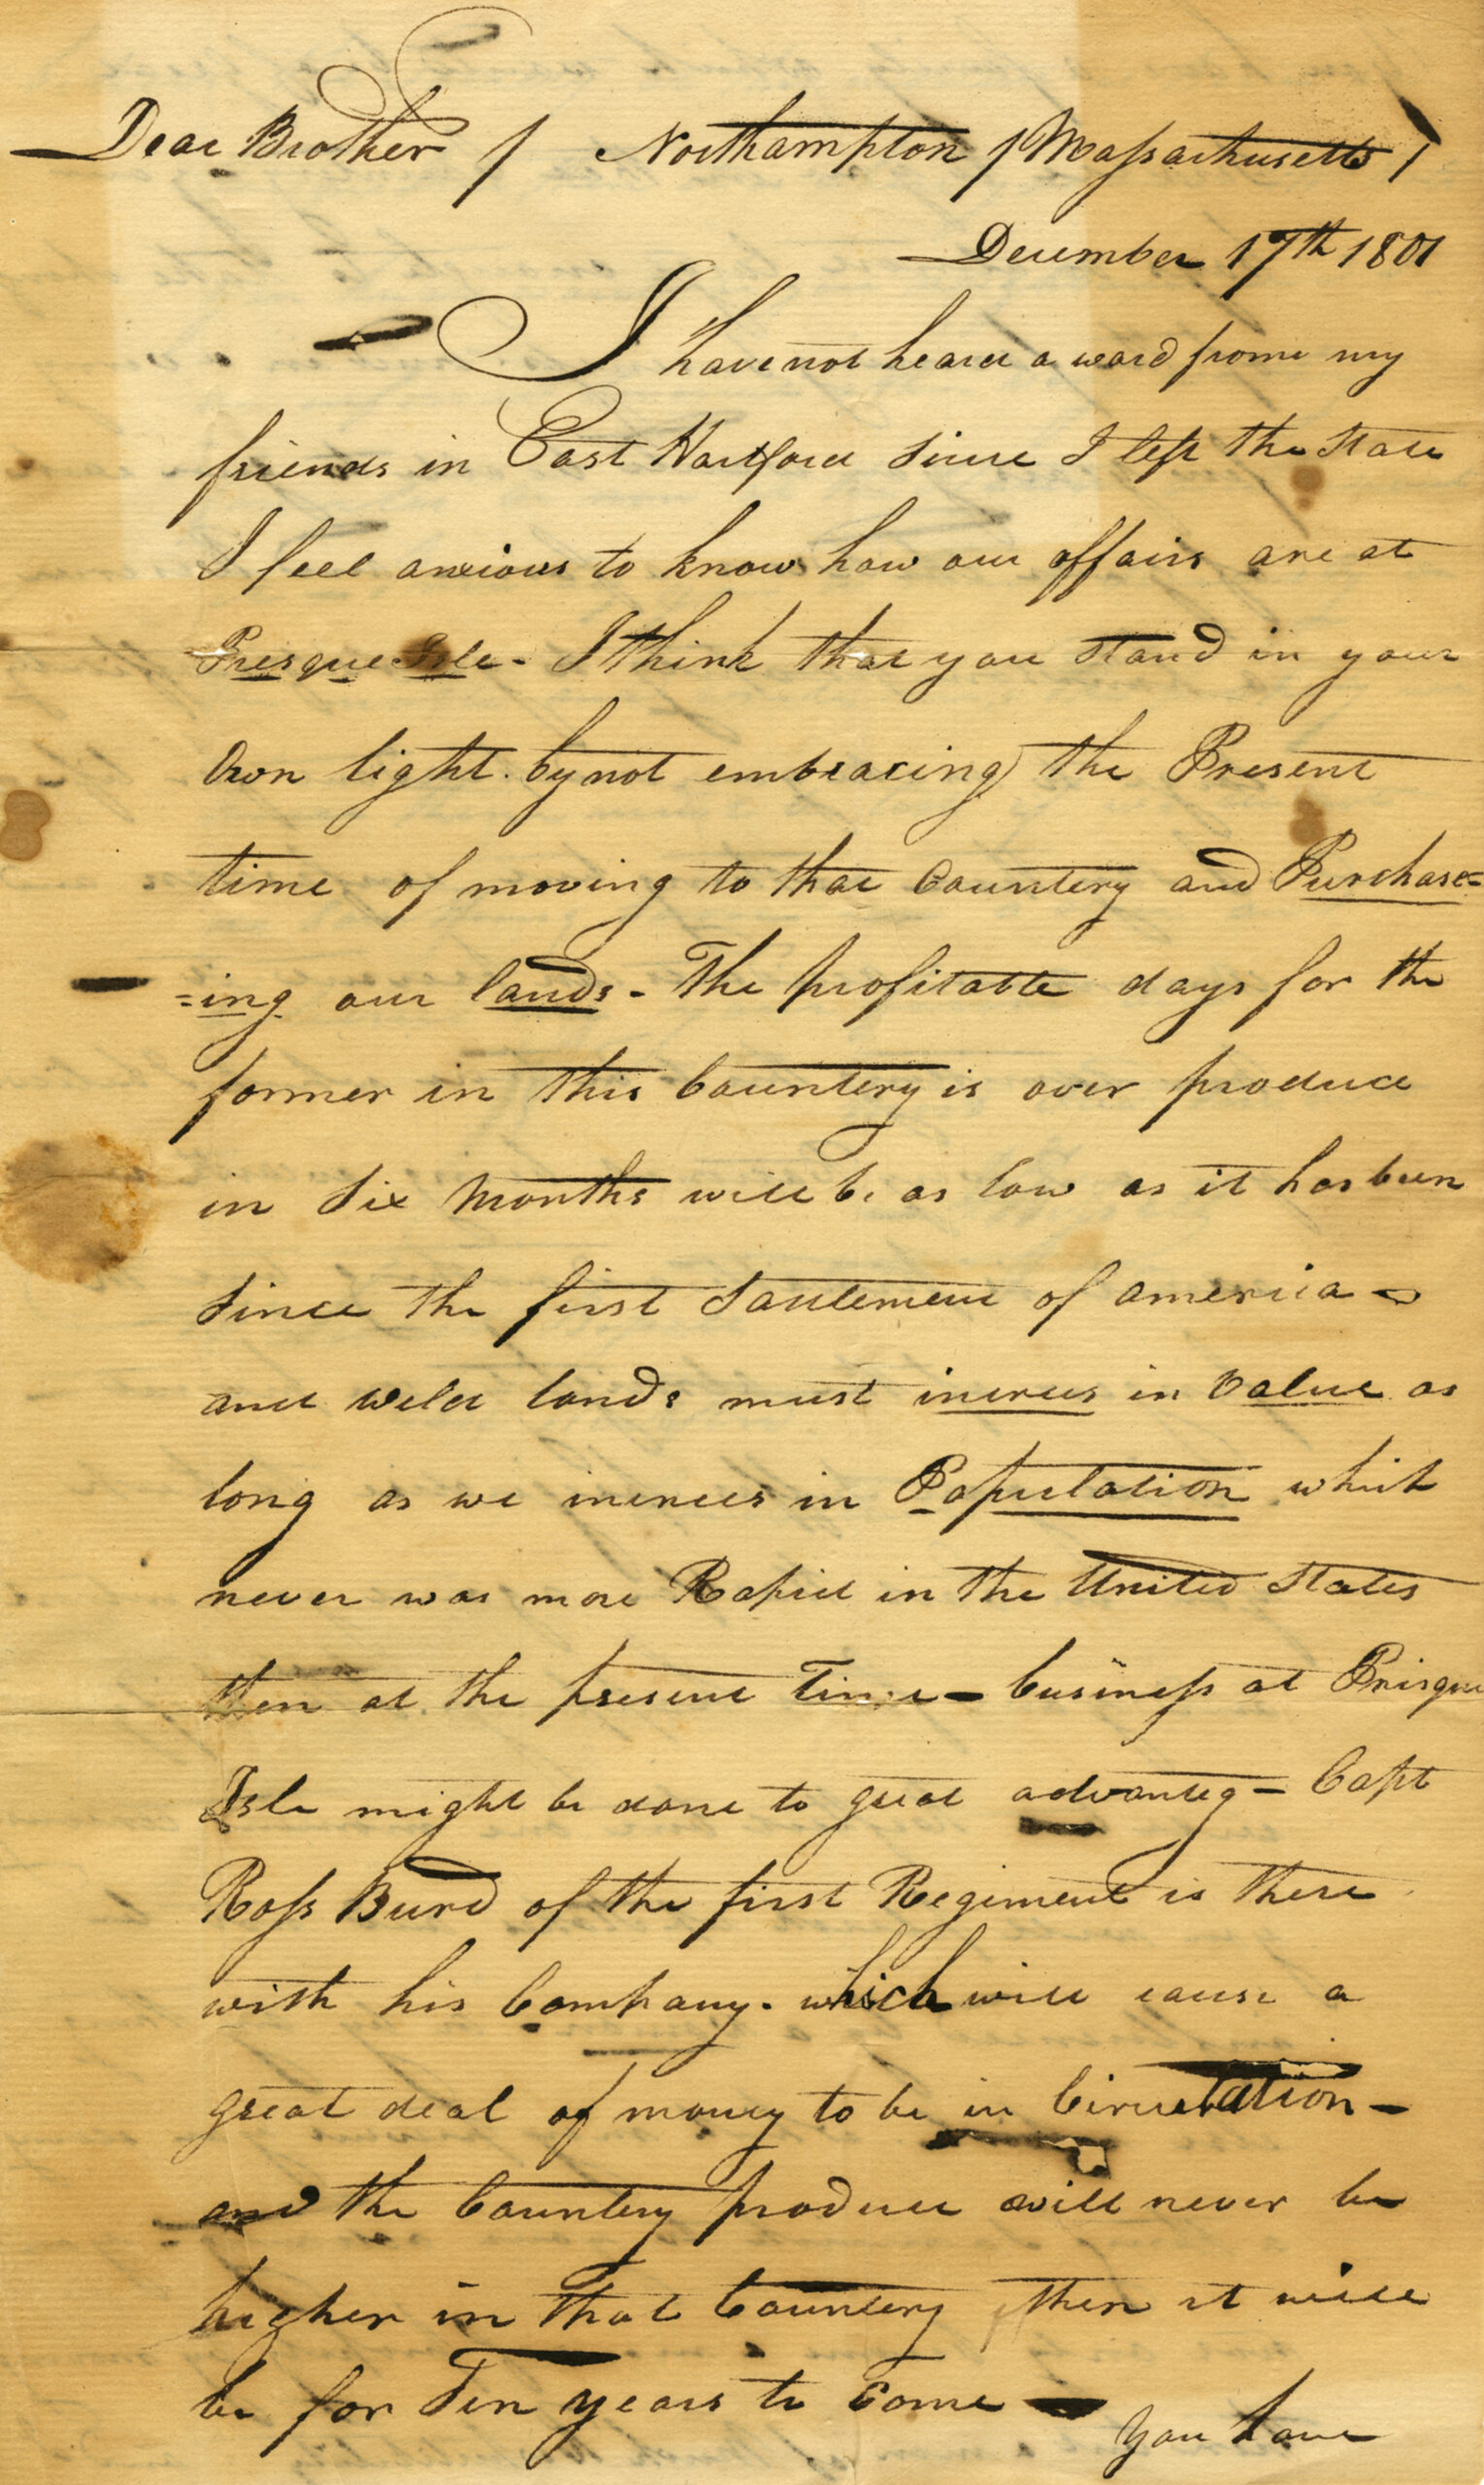 1807/12/17 Letter from Daniel Bissell to Leverett Bissell